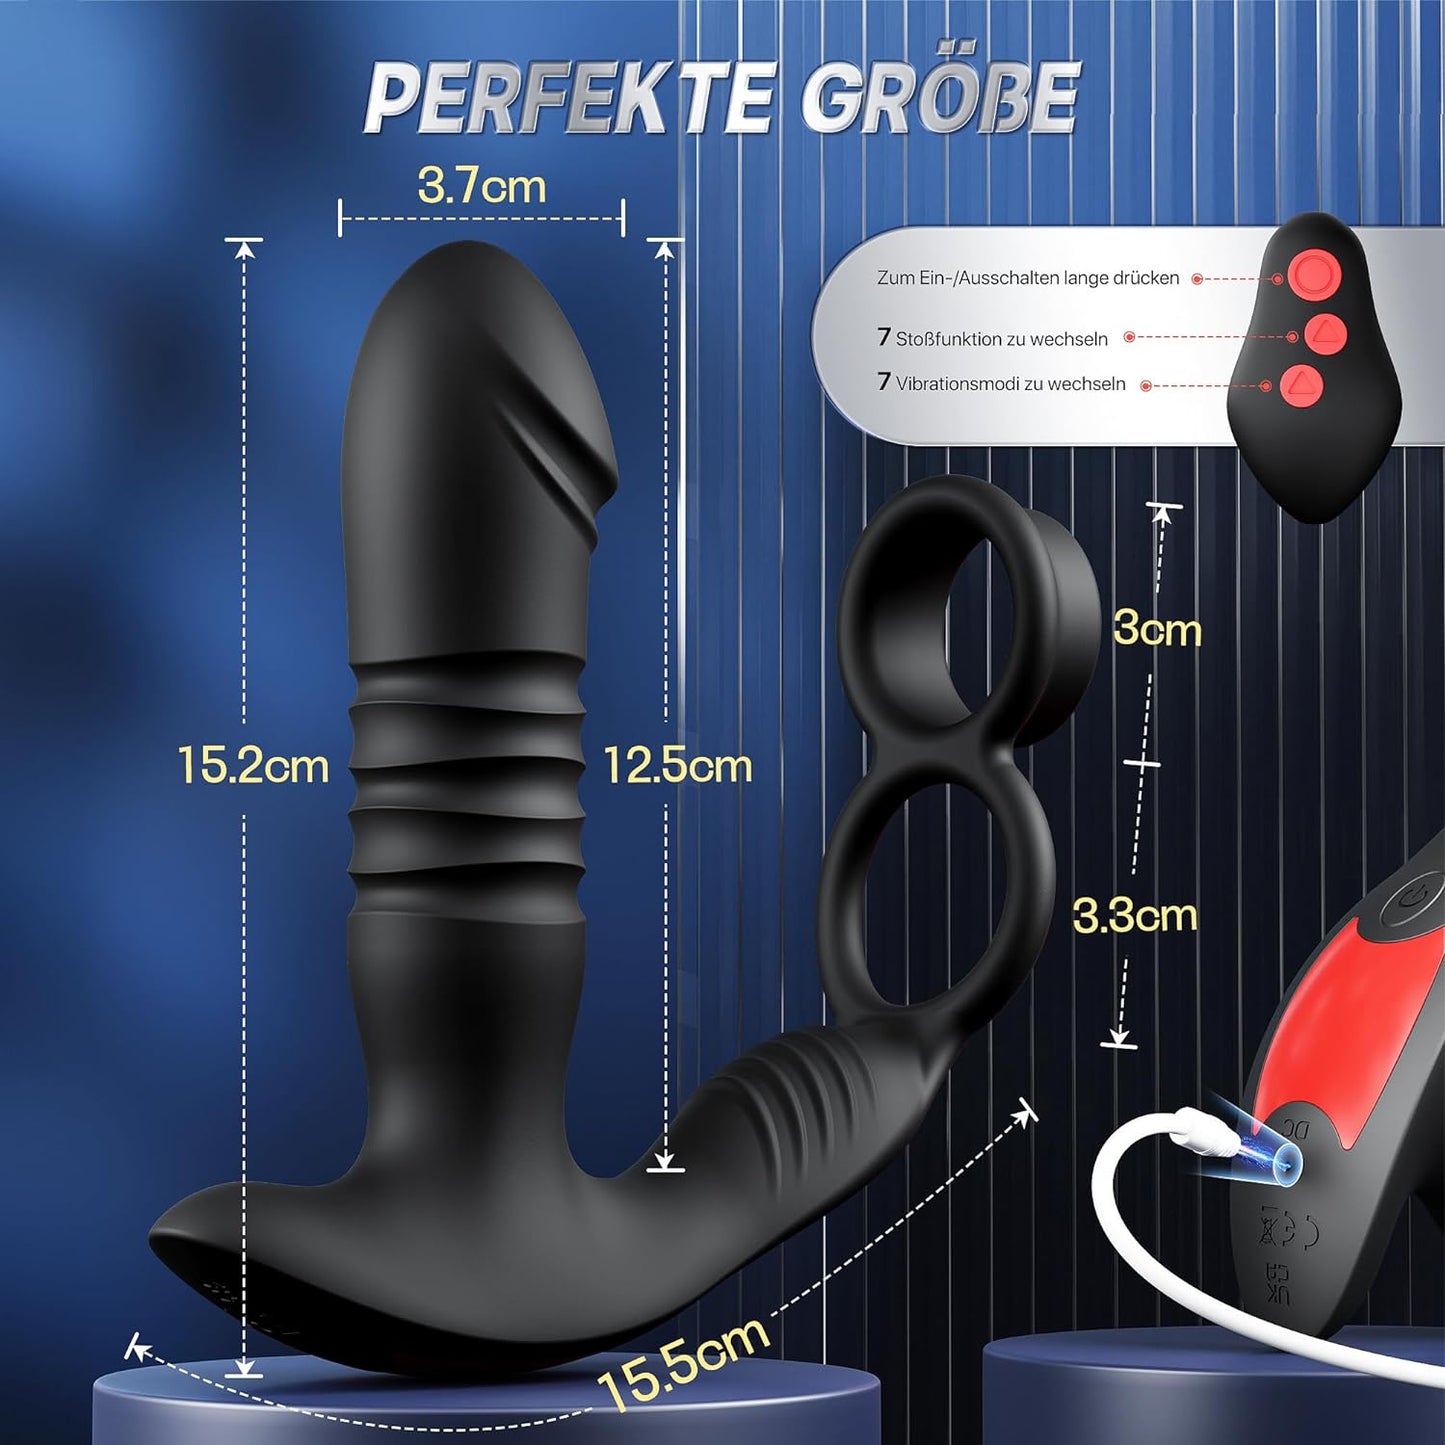 3 in 1 cock ring anal vibrators prostate stimulation with 7 shock functions and 7 vibration modes 